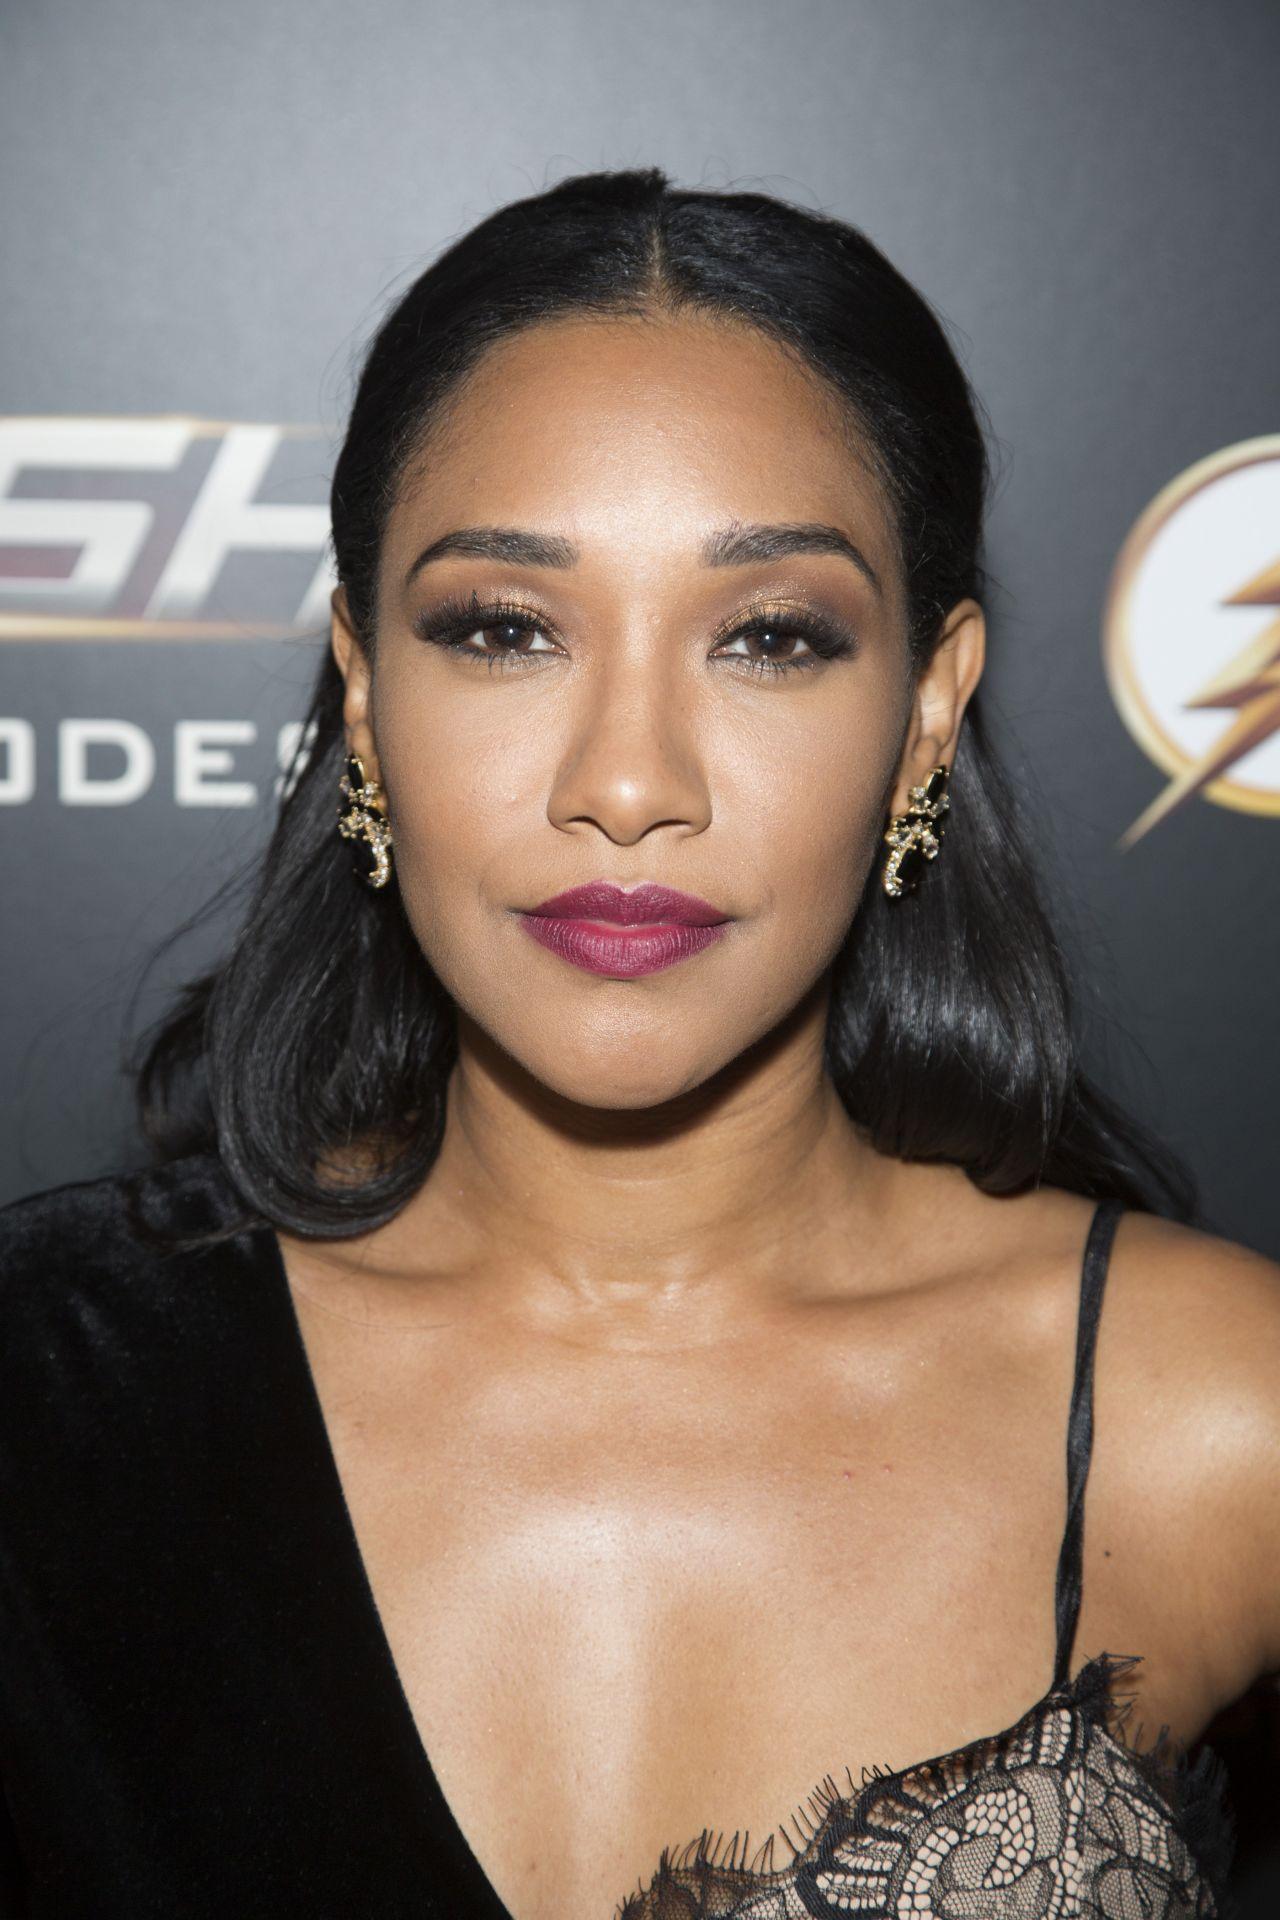 70+ Hot Pictures Of Candice Patton Who Plays Iris West In Flash TV Series 67